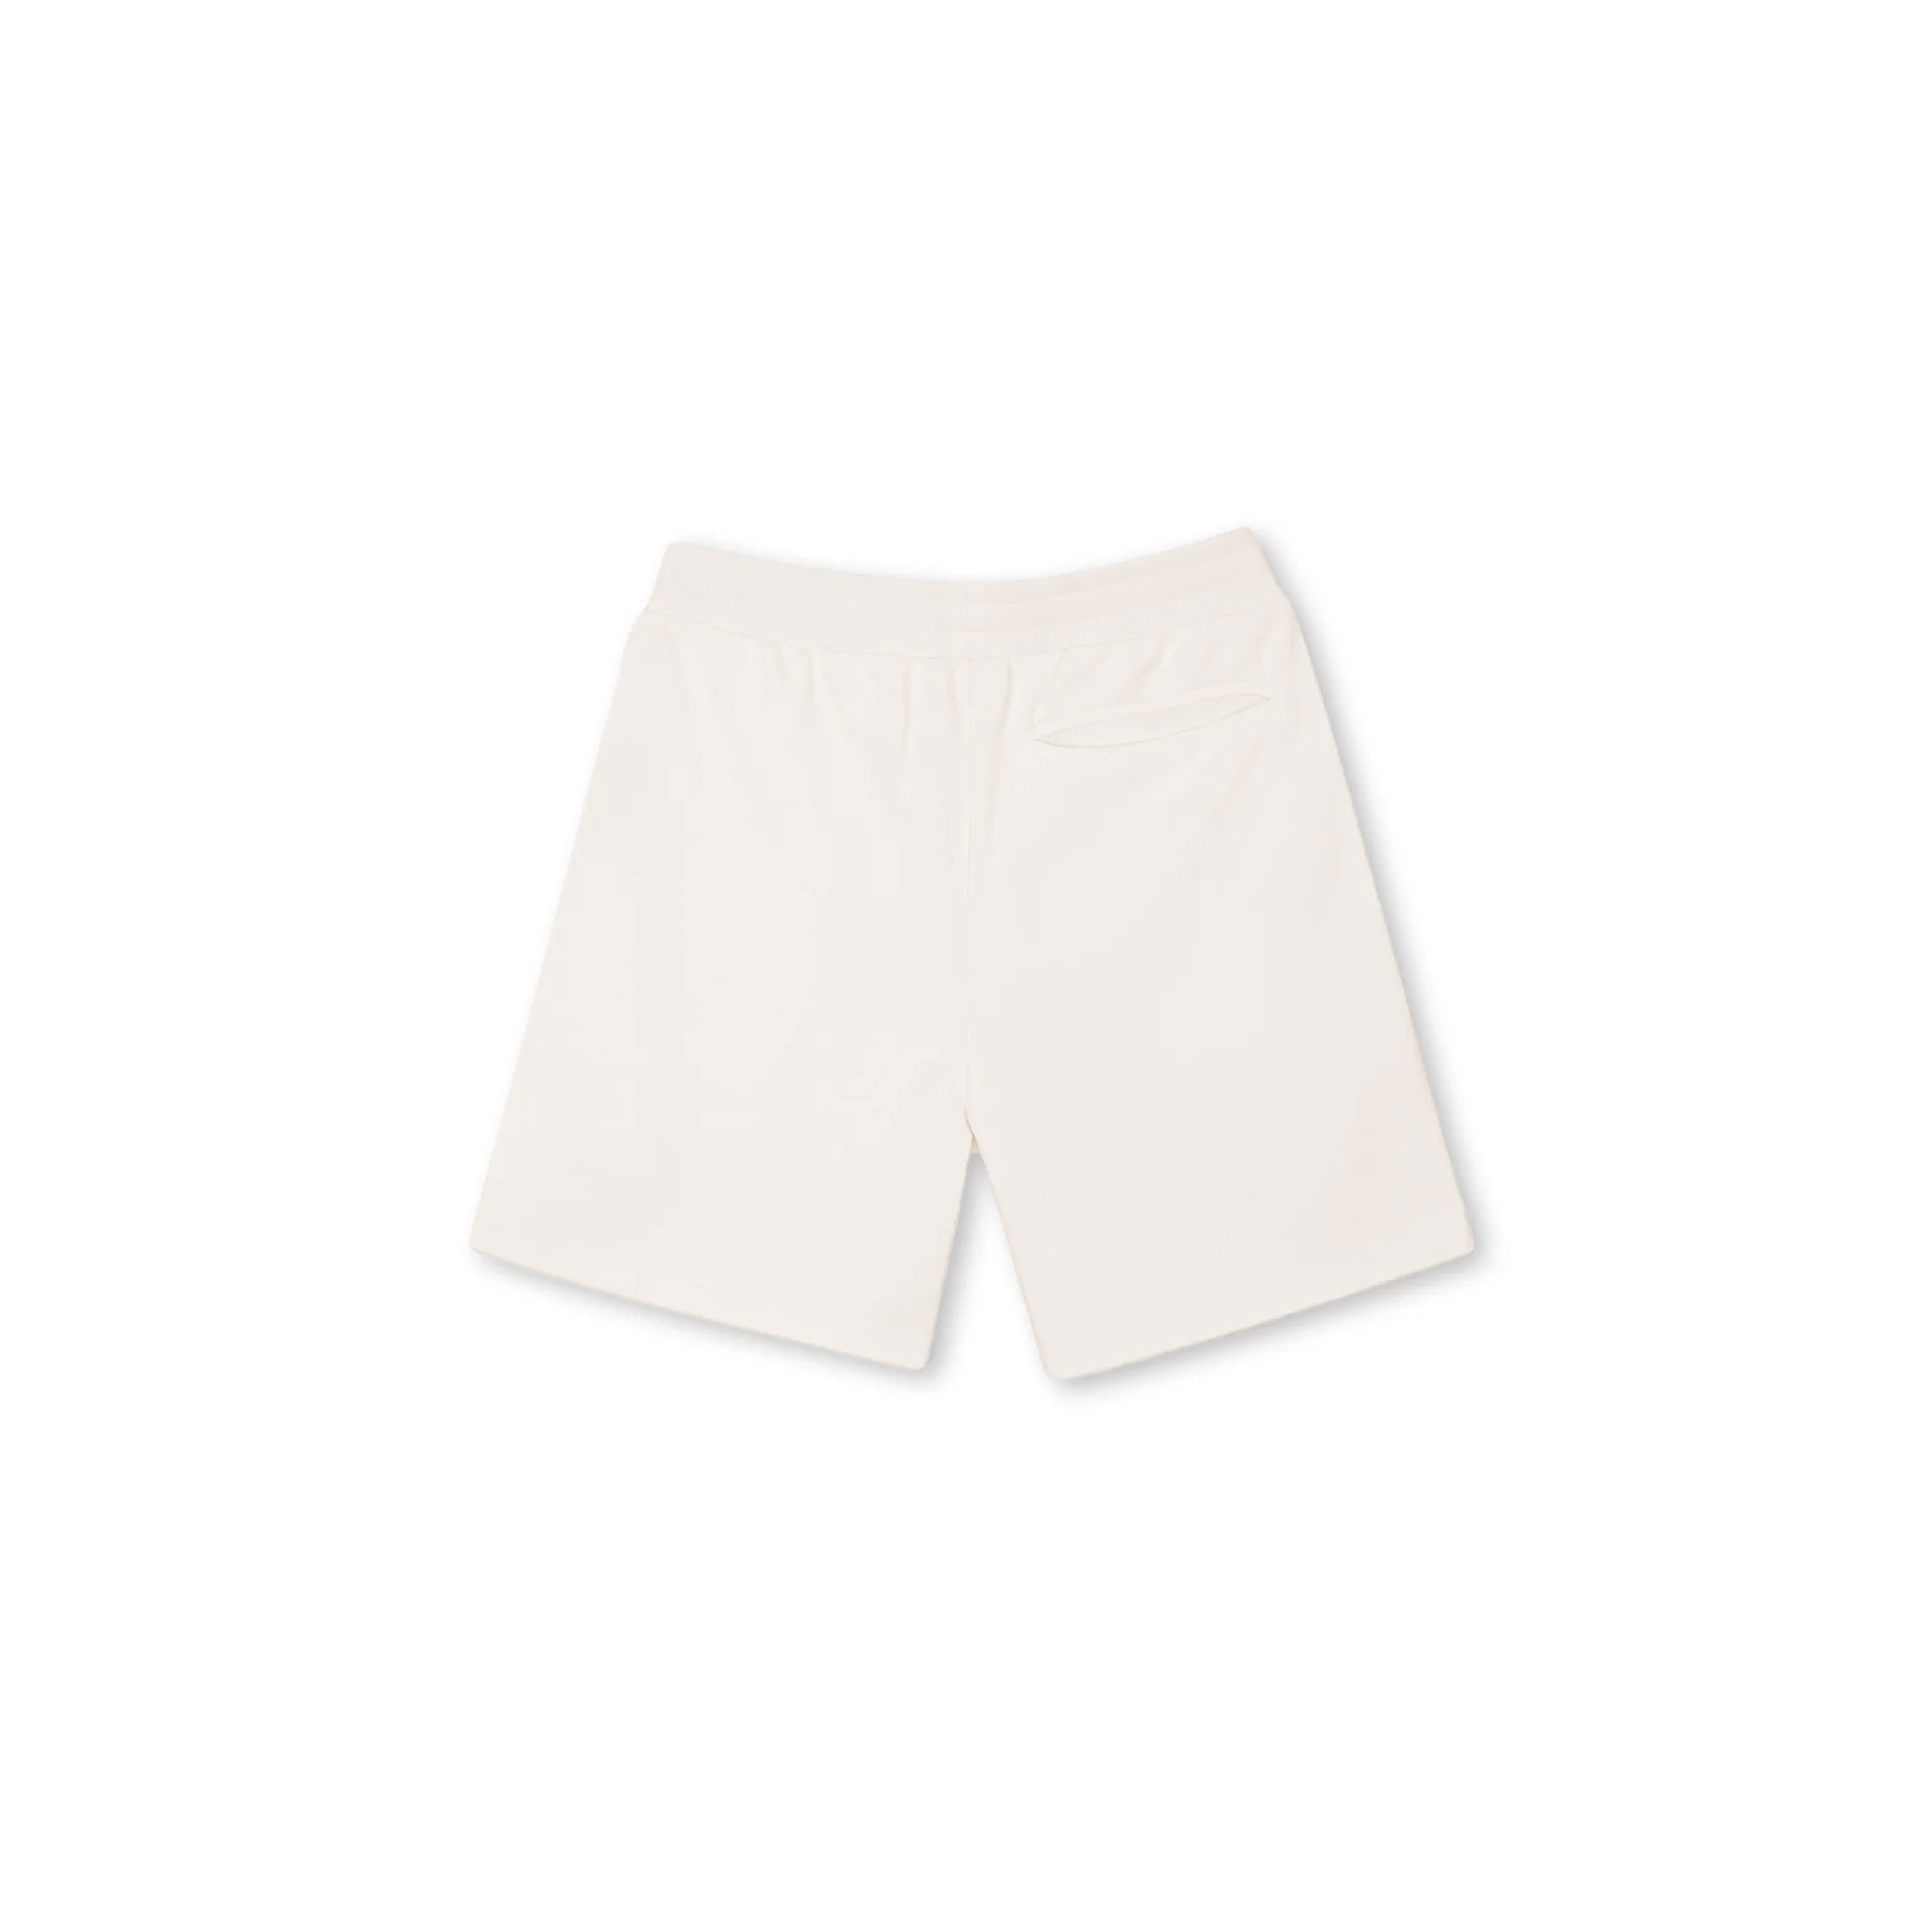 Dreamers French Terry Shorts - Vintage White